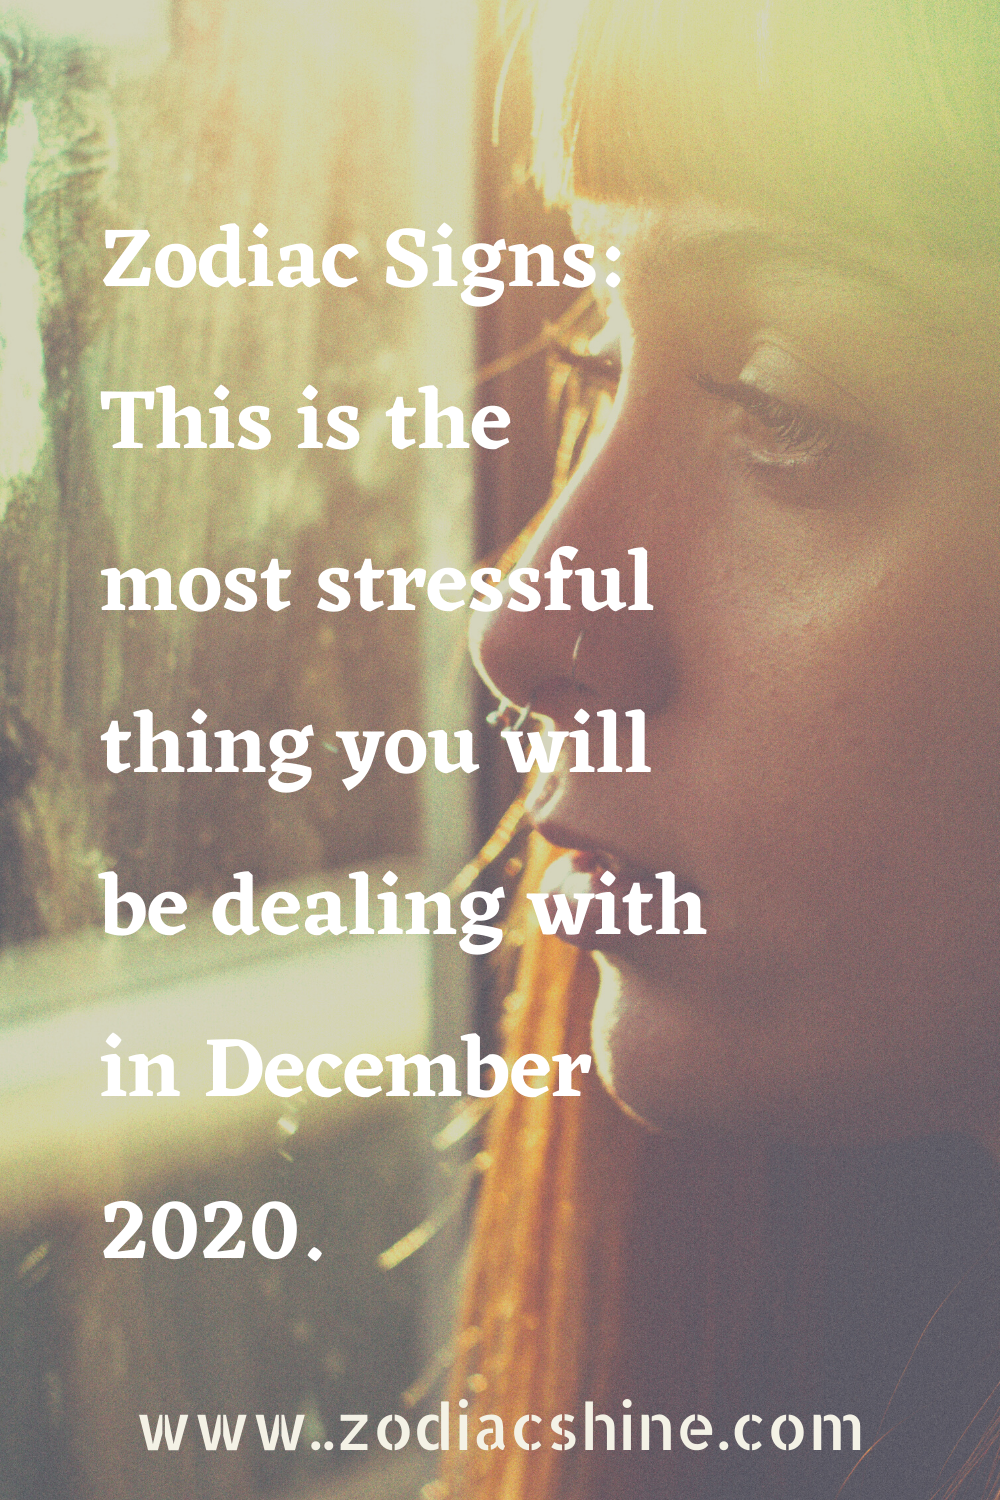 Zodiac Signs: This is the most stressful thing you will be dealing with in December 2020.